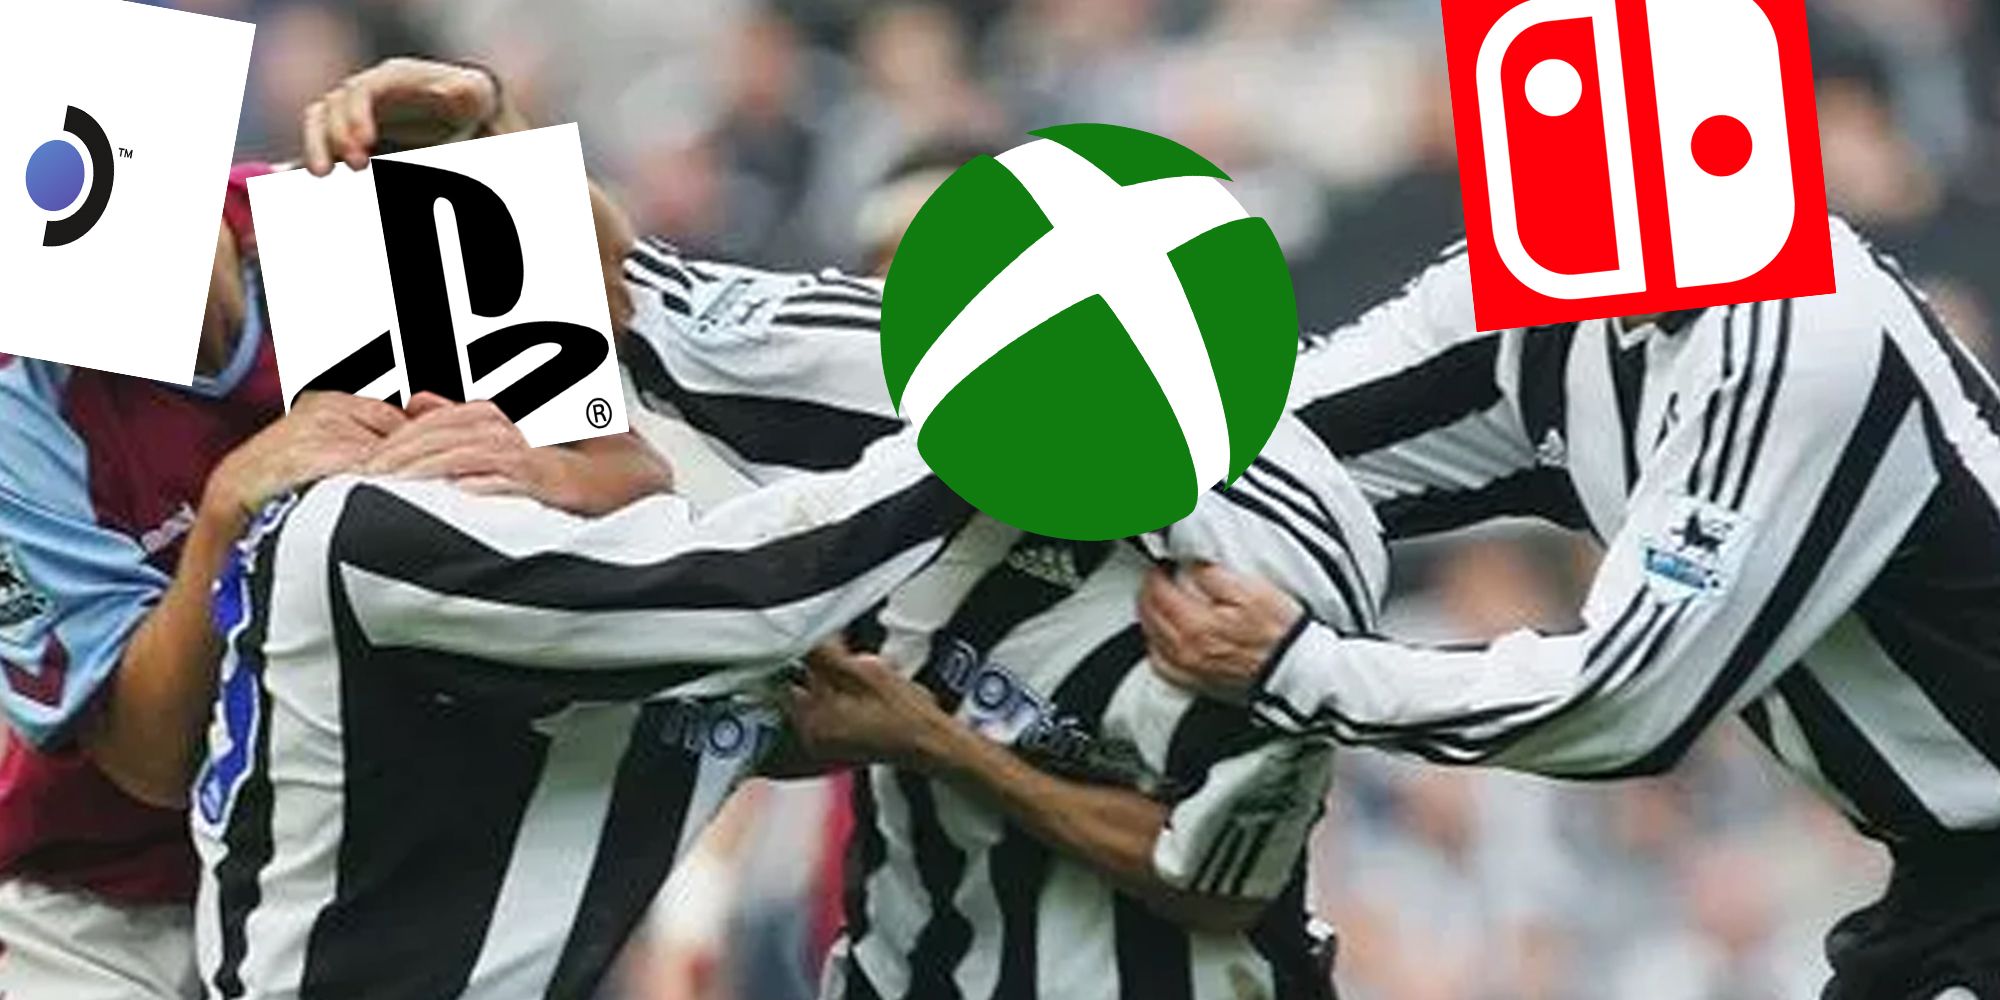 Console wars represented by PlayStation and Xbox fighting superimposed over Keiron Dyer and Lee Bowyer